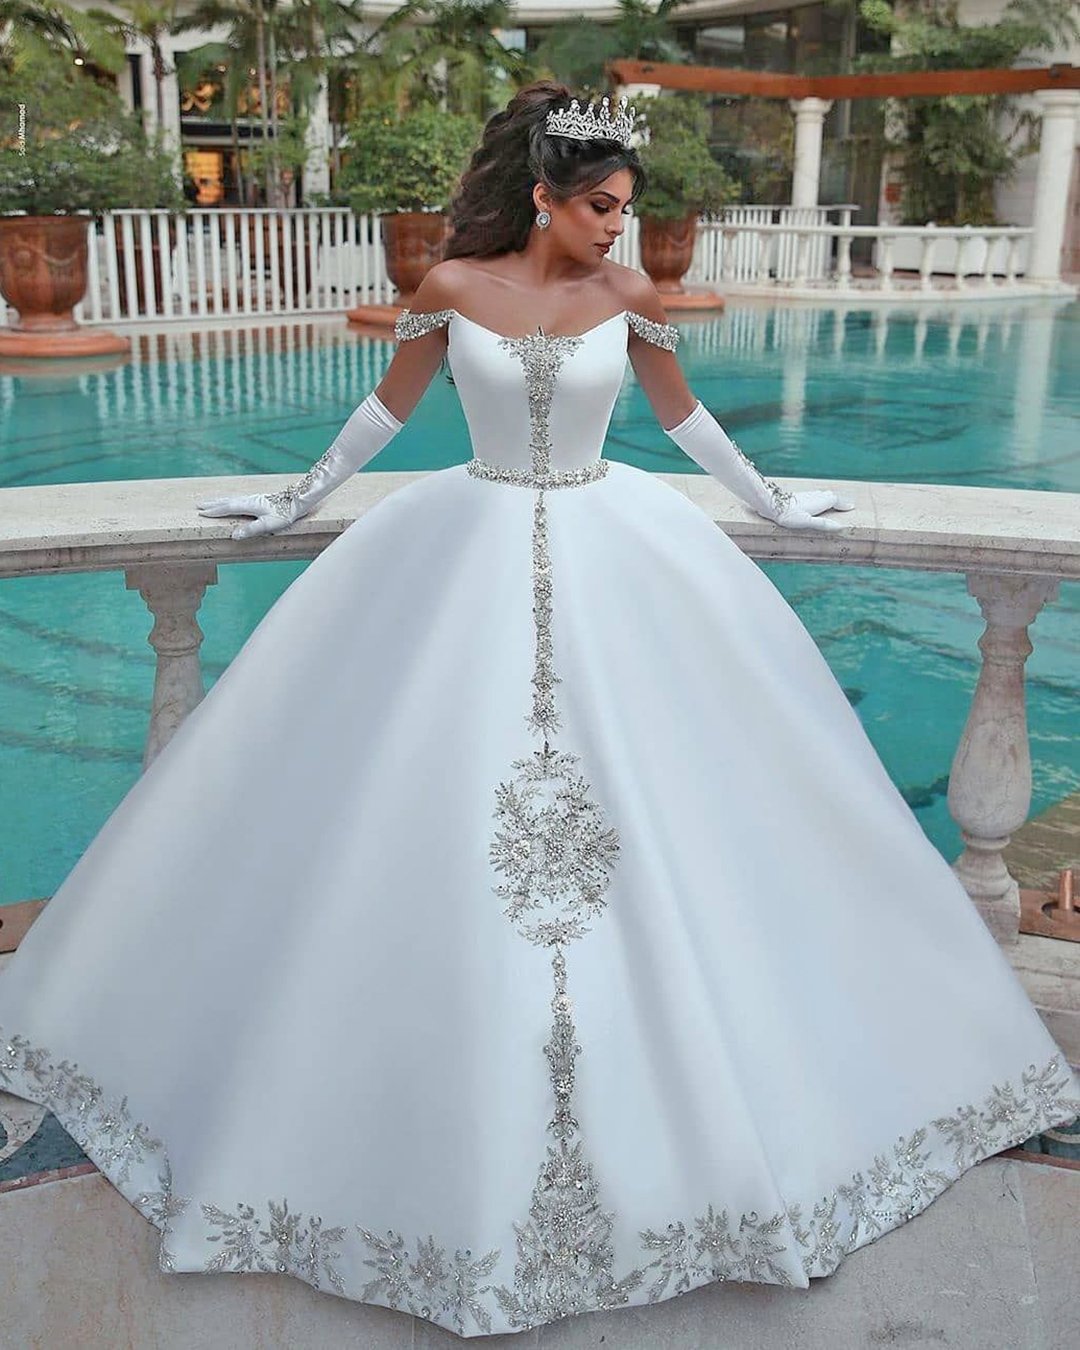 disney wedding dresses ball gown off the shoulder beaded lace with gloves said